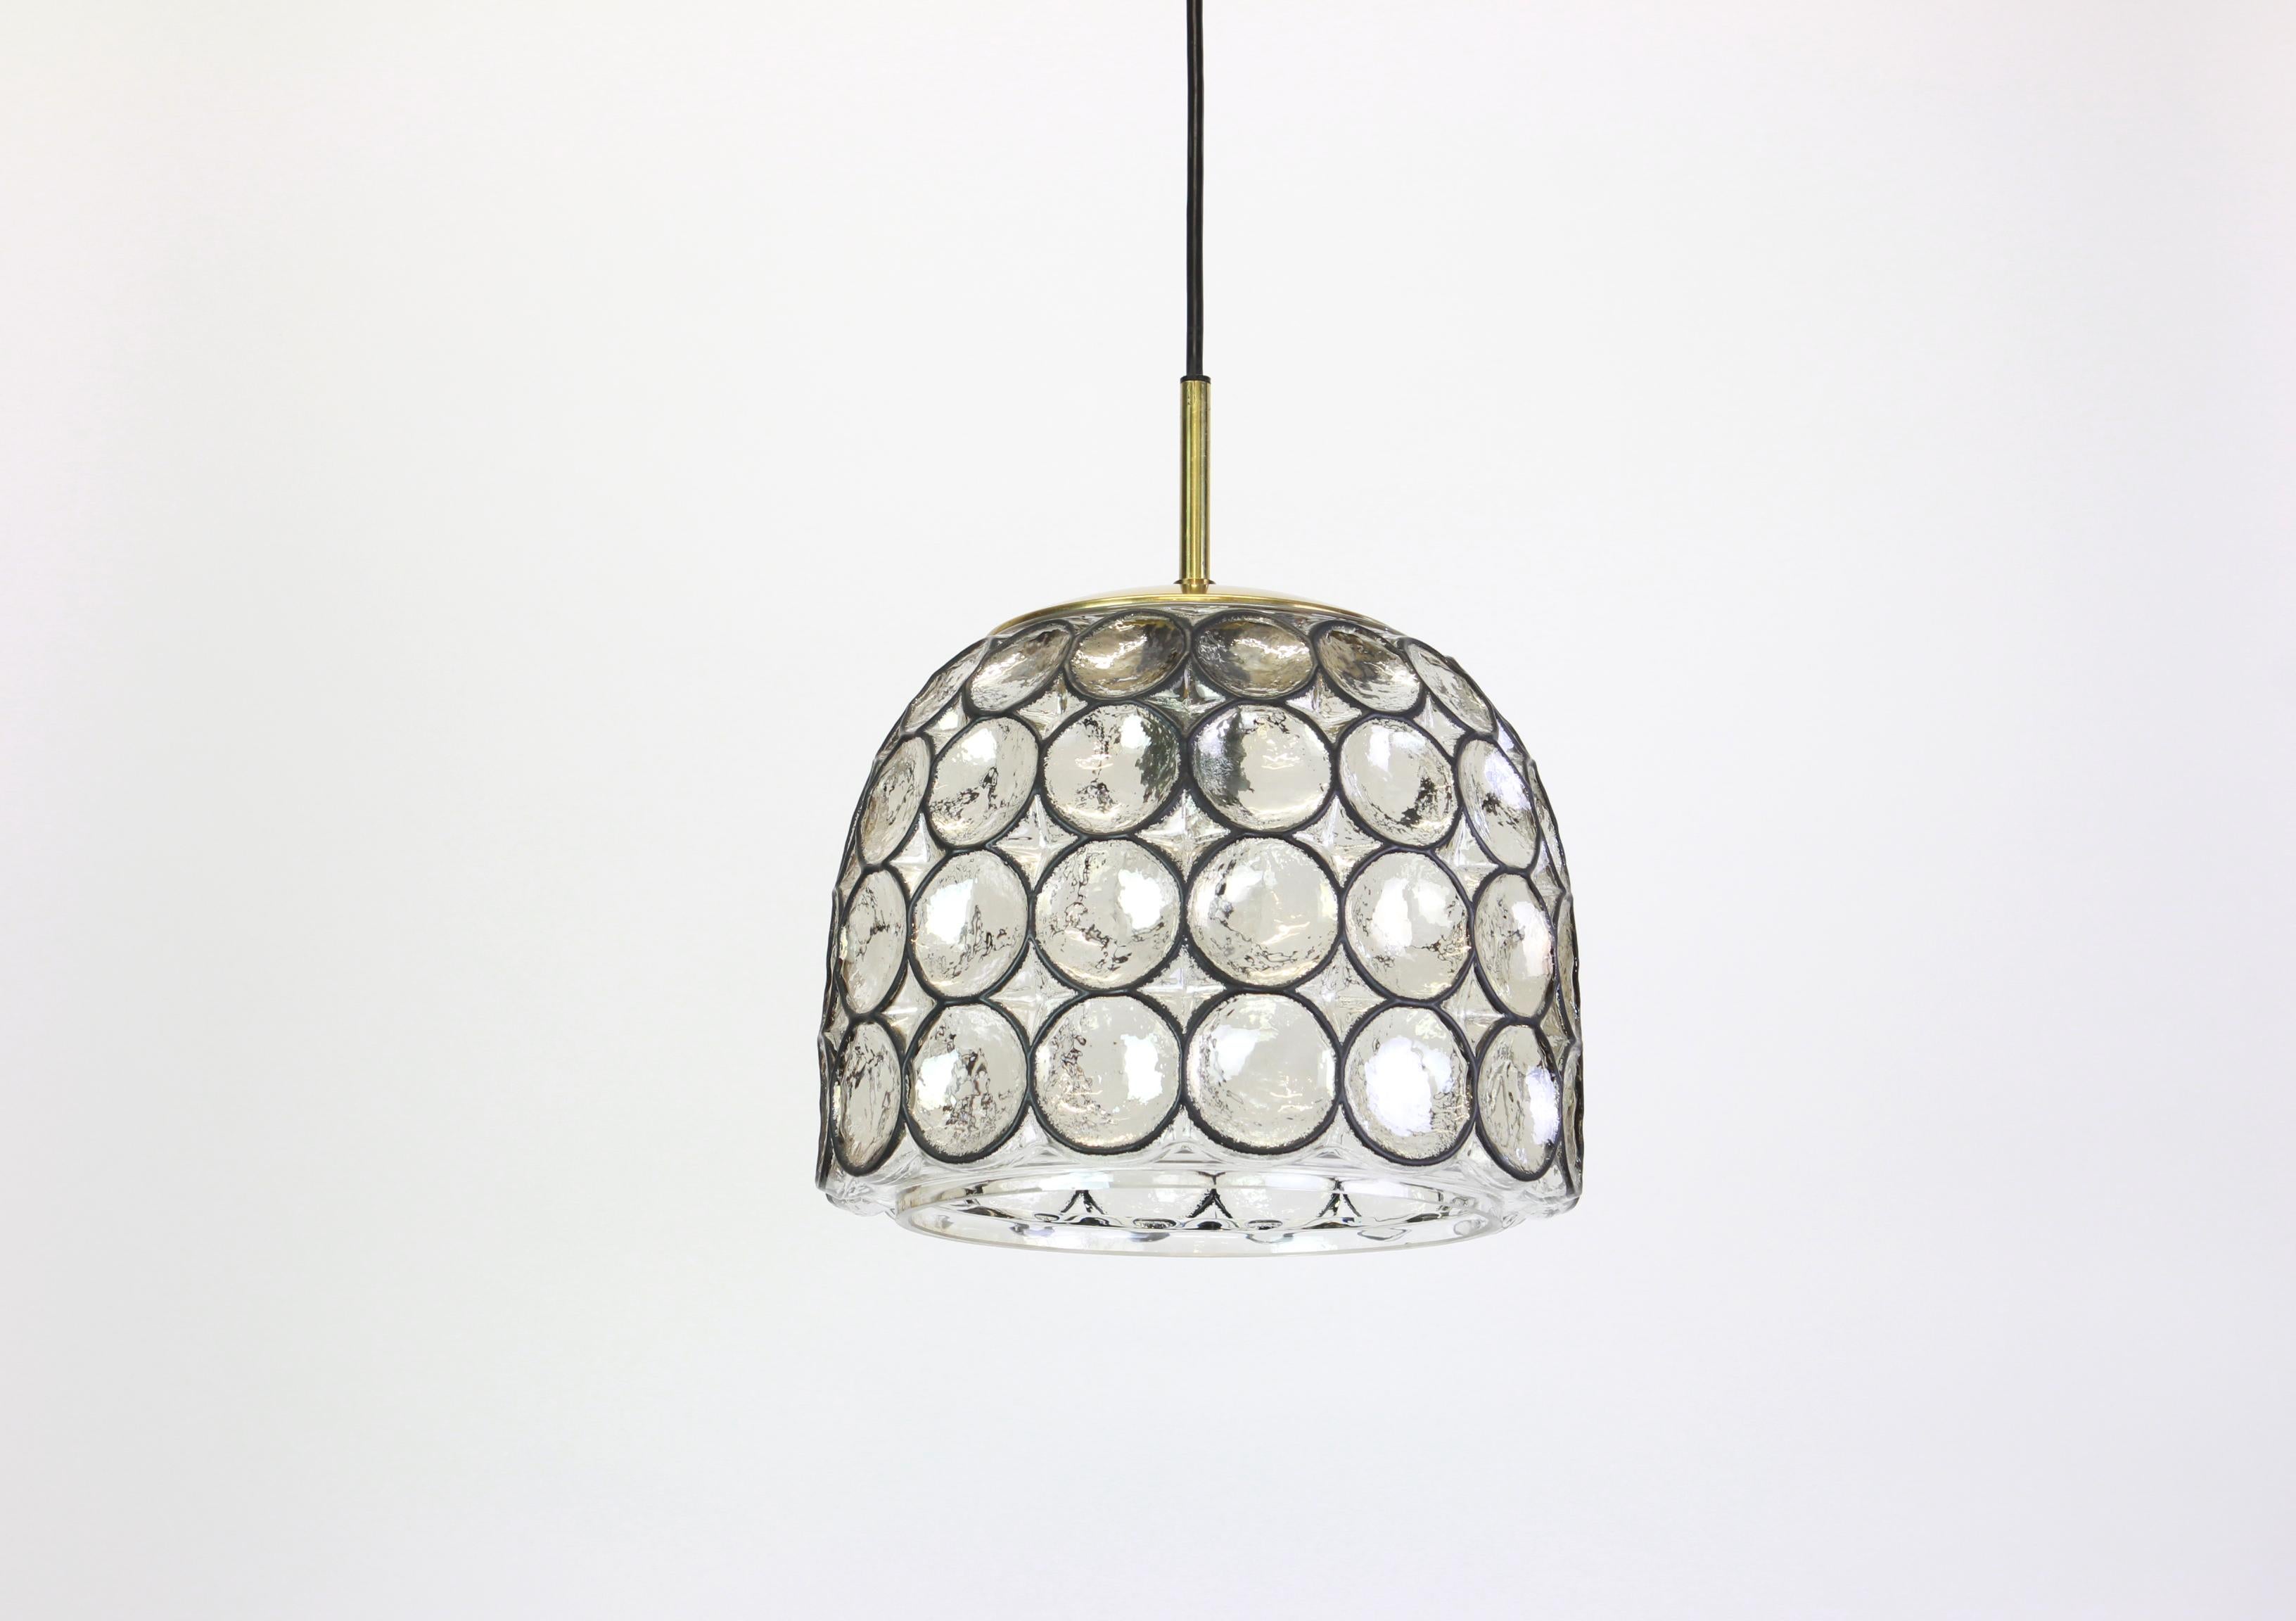 Minimalist iron and clear glass pendant light manufactured by Limburg Glashu¨tte, Germany, circa 1960-1969. 

Heavy quality and in very good condition. Cleaned, well-wired and ready to use. The fixture requires 1 x E27 Standard bulbs with 100W max